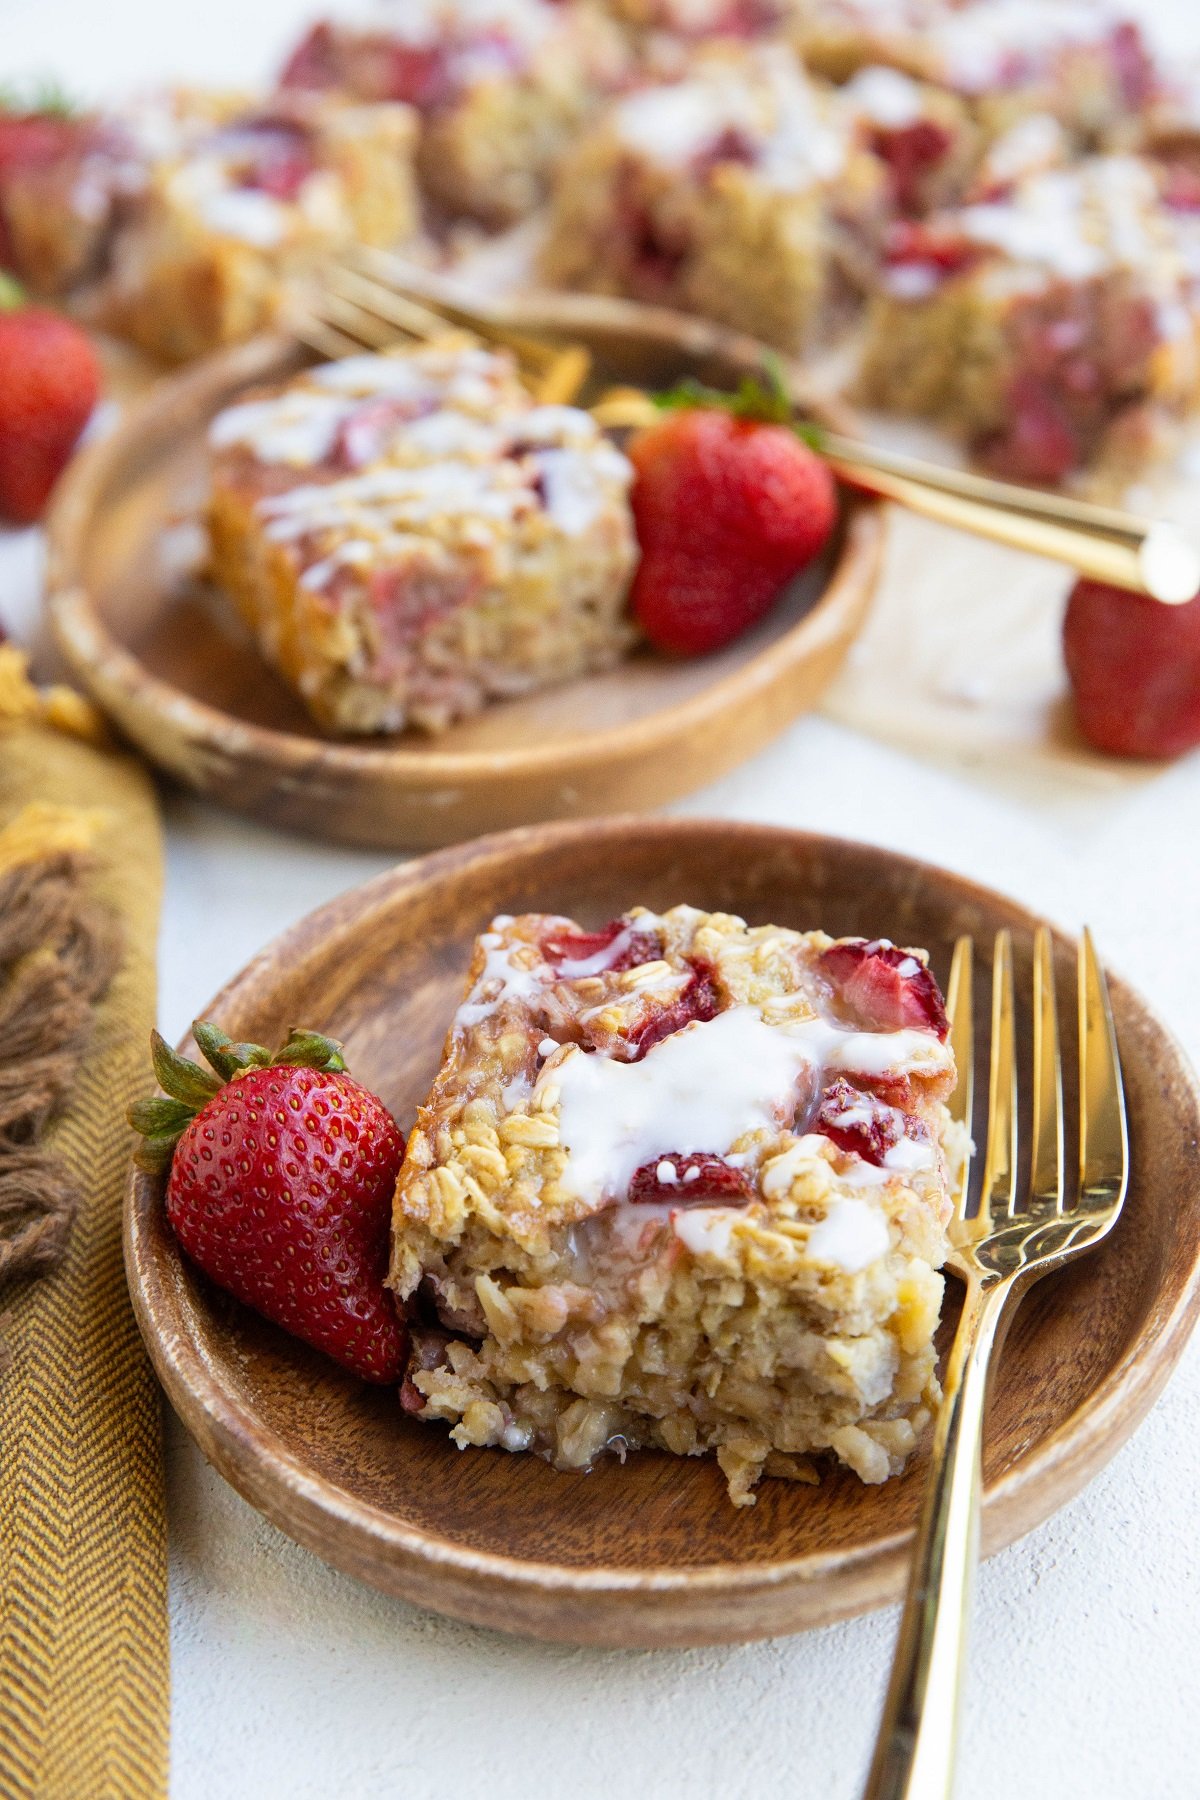 Two wooden plates of baked oatmeal with more pieces of baked oatmeal in the background.